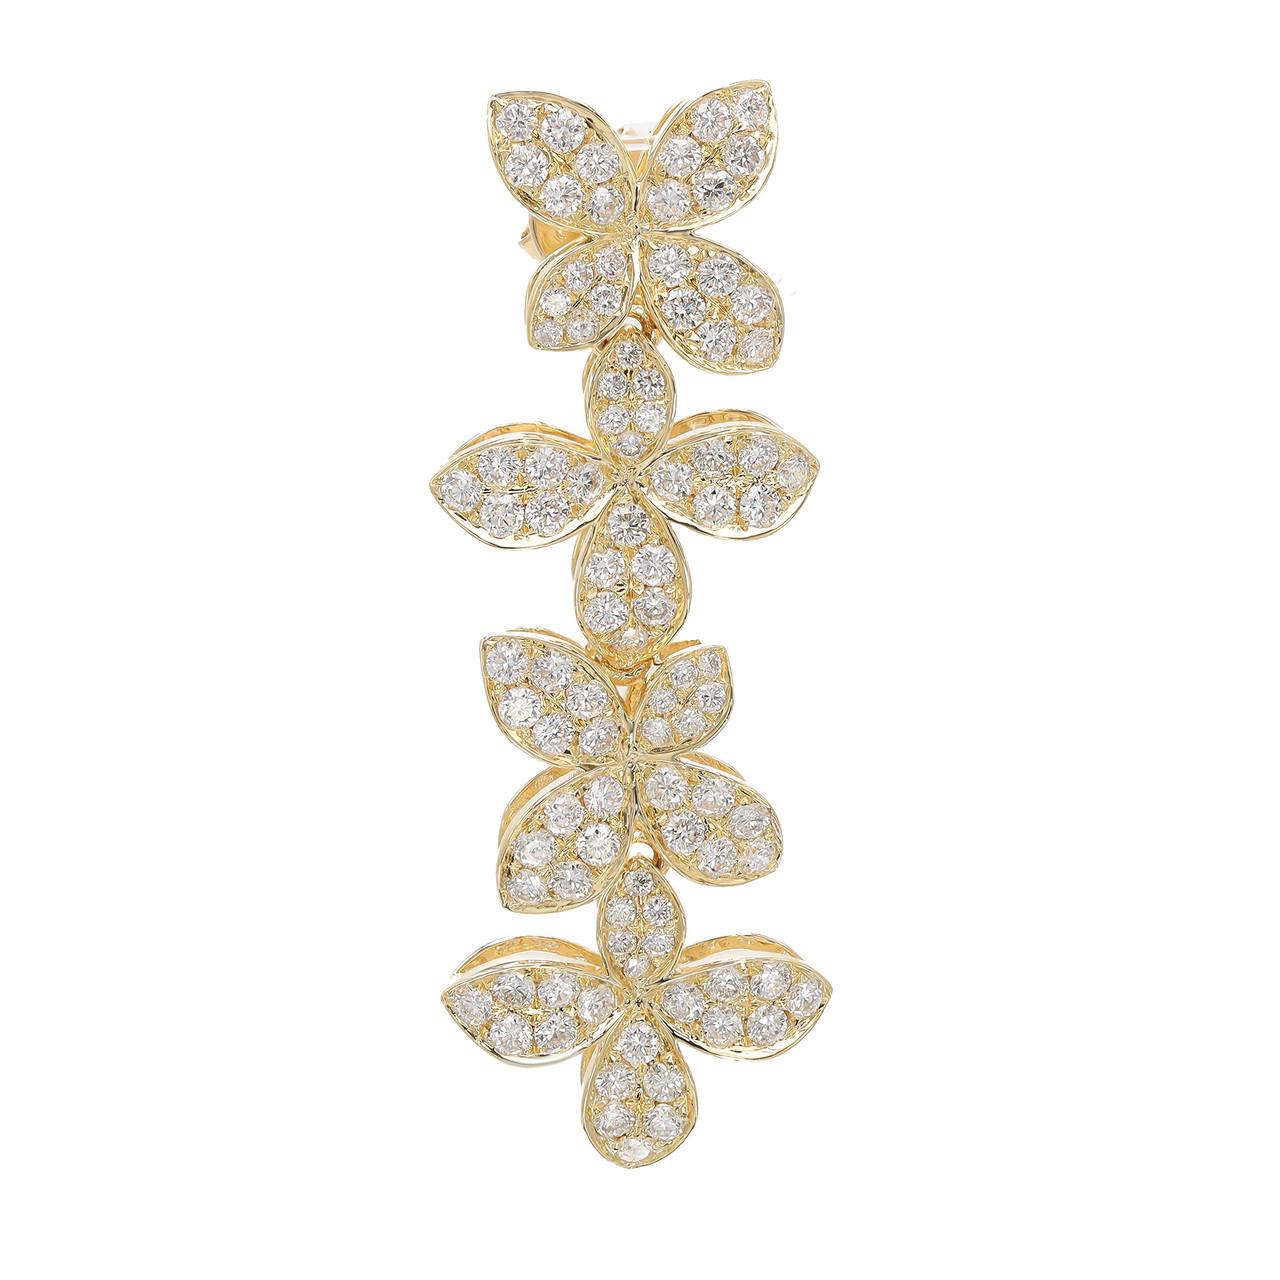 Elevate your style with the captivating charm of these 2.00 Carat Diamond Flower Drop Earrings in 18K Yellow Gold. These glamorous earrings combine whimsy and sparkle to create a truly enchanting accessory. The delightful flower design is adorned